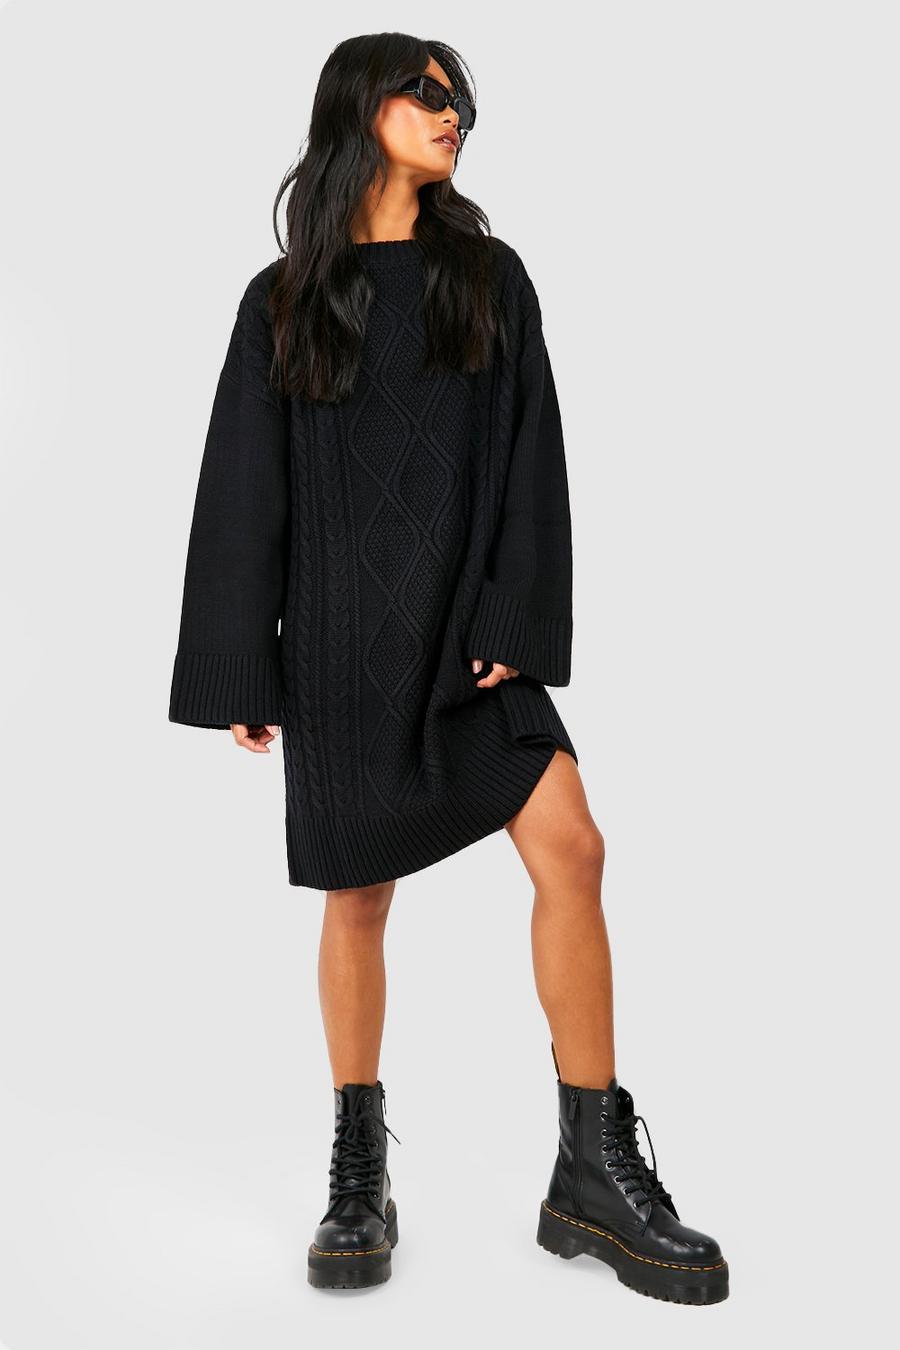 Black Chunky Oversized Cable Knit Jumper Dress 